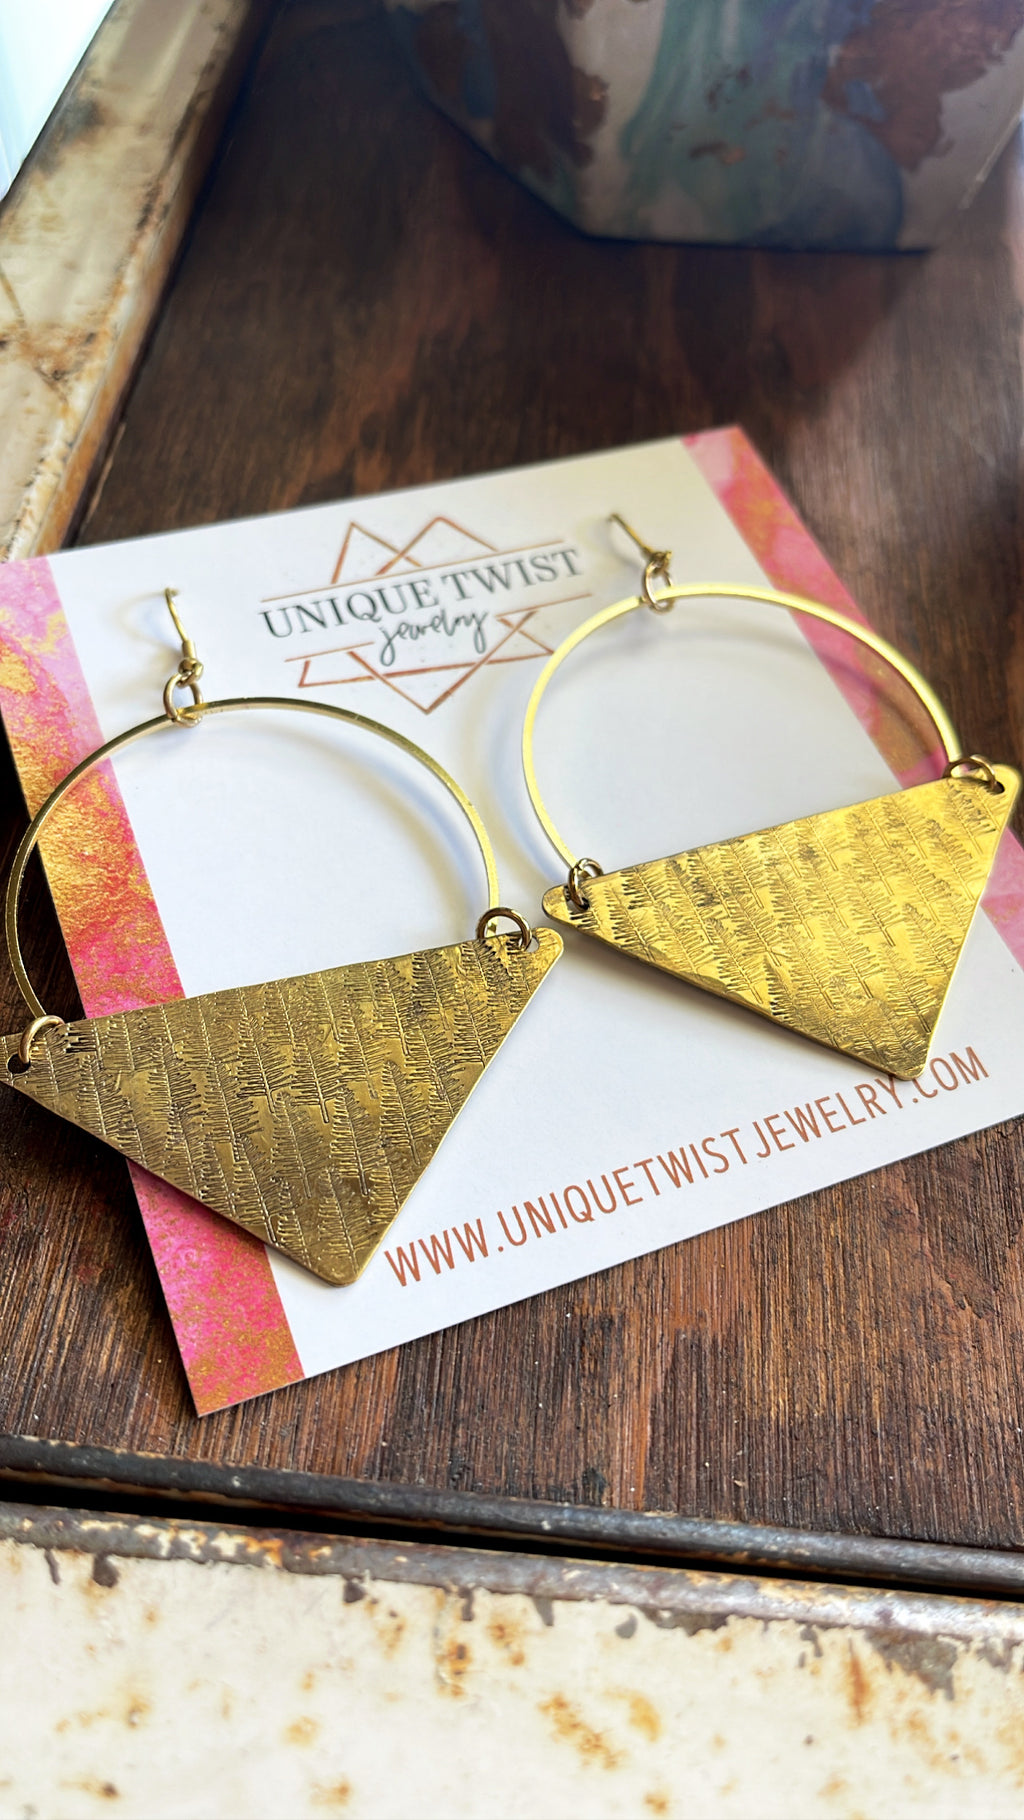 The Isabella Hand-Stamped Earrings